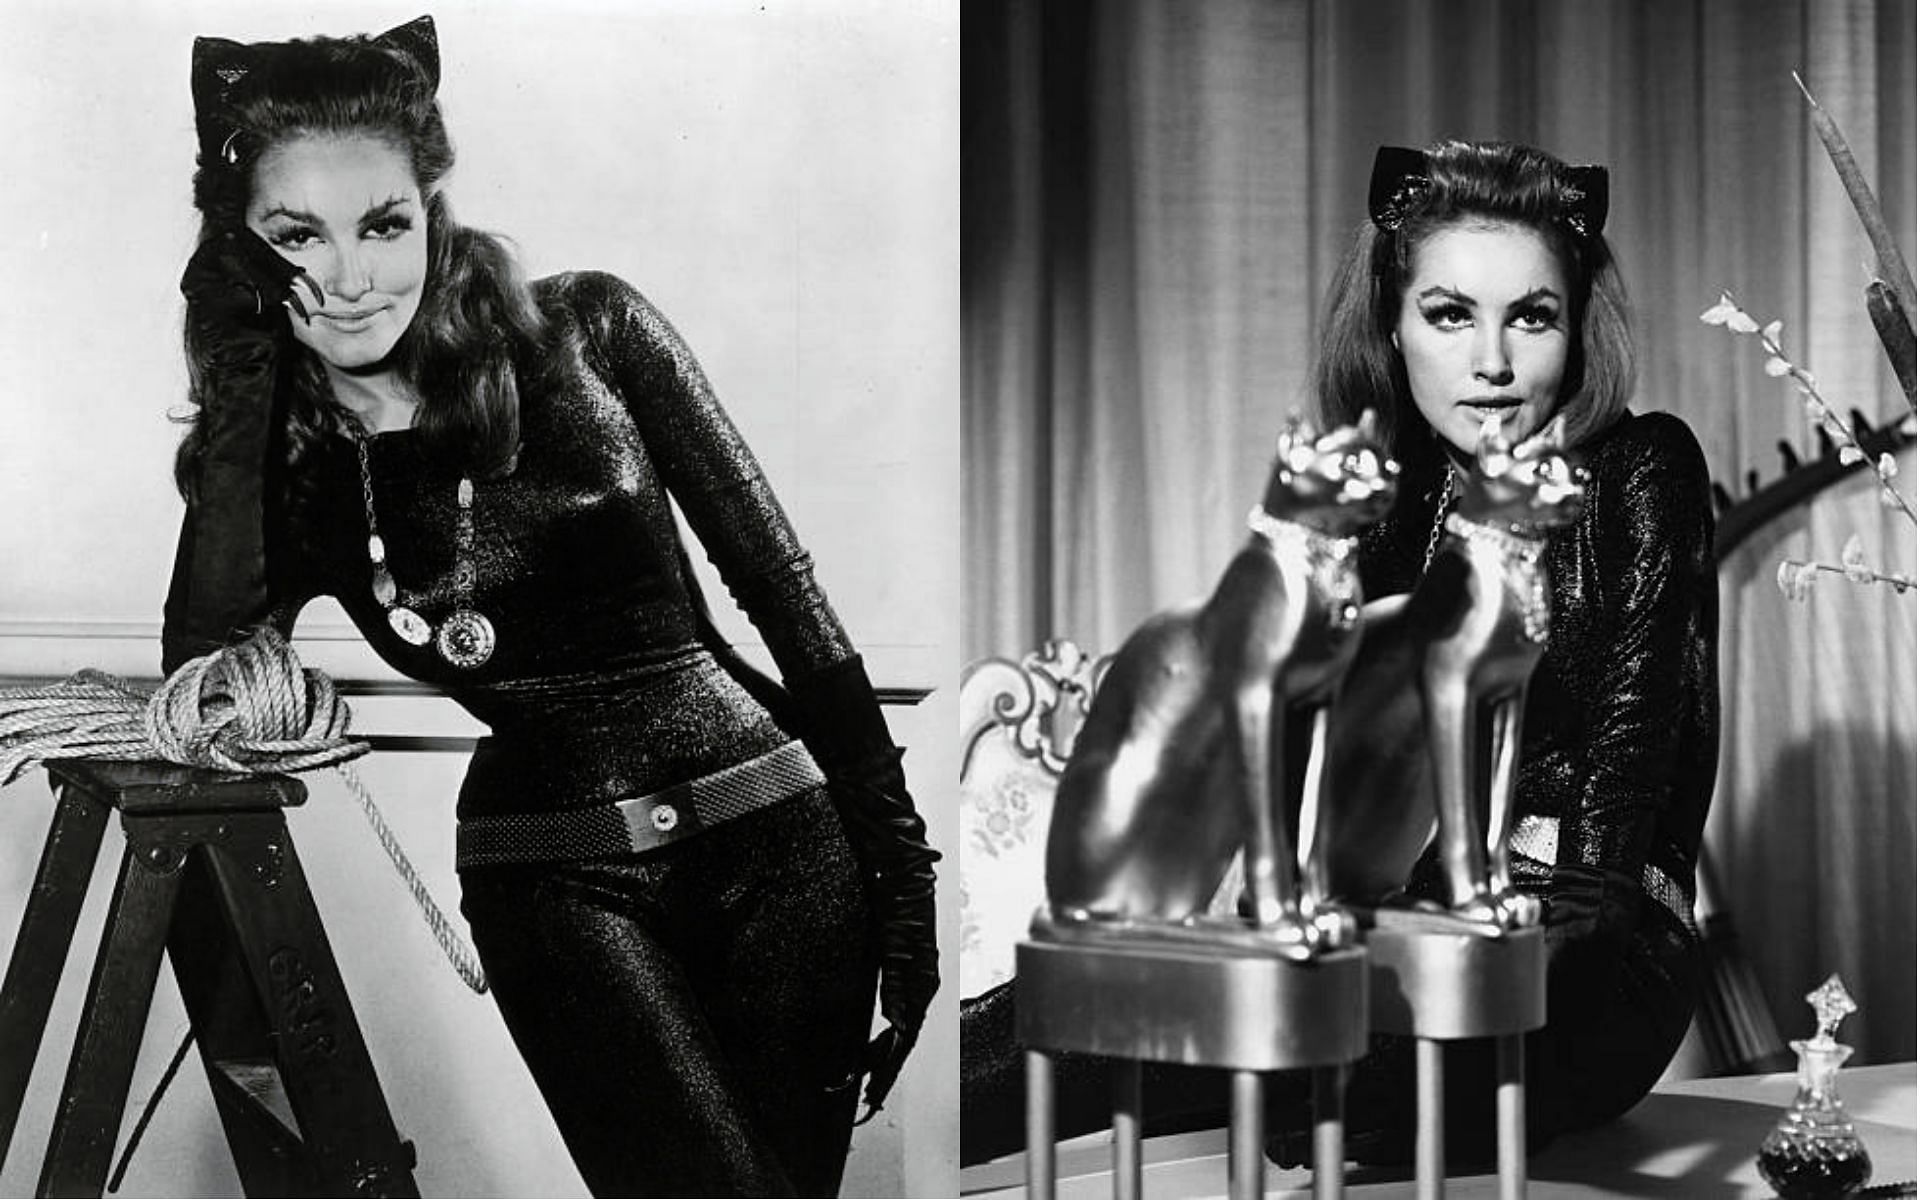 Julie Newmar as Catwoman in the Batman series (1966-1967) (Image via Getty Images)